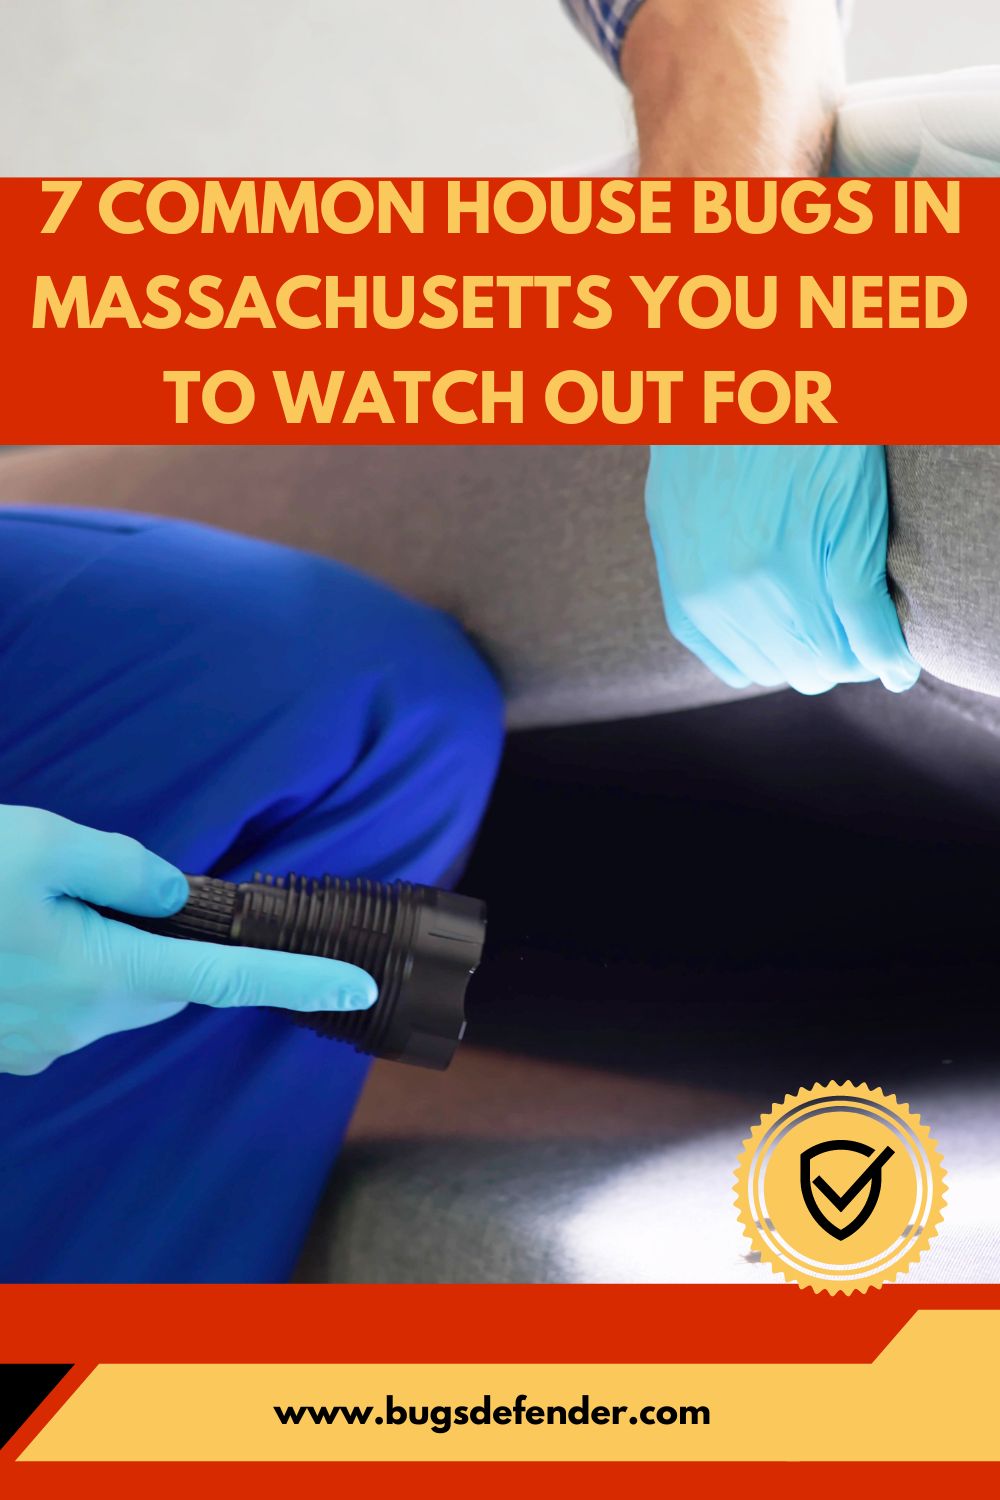 7 Common House Bugs In Massachusetts You Need To Watch Out For pin 1